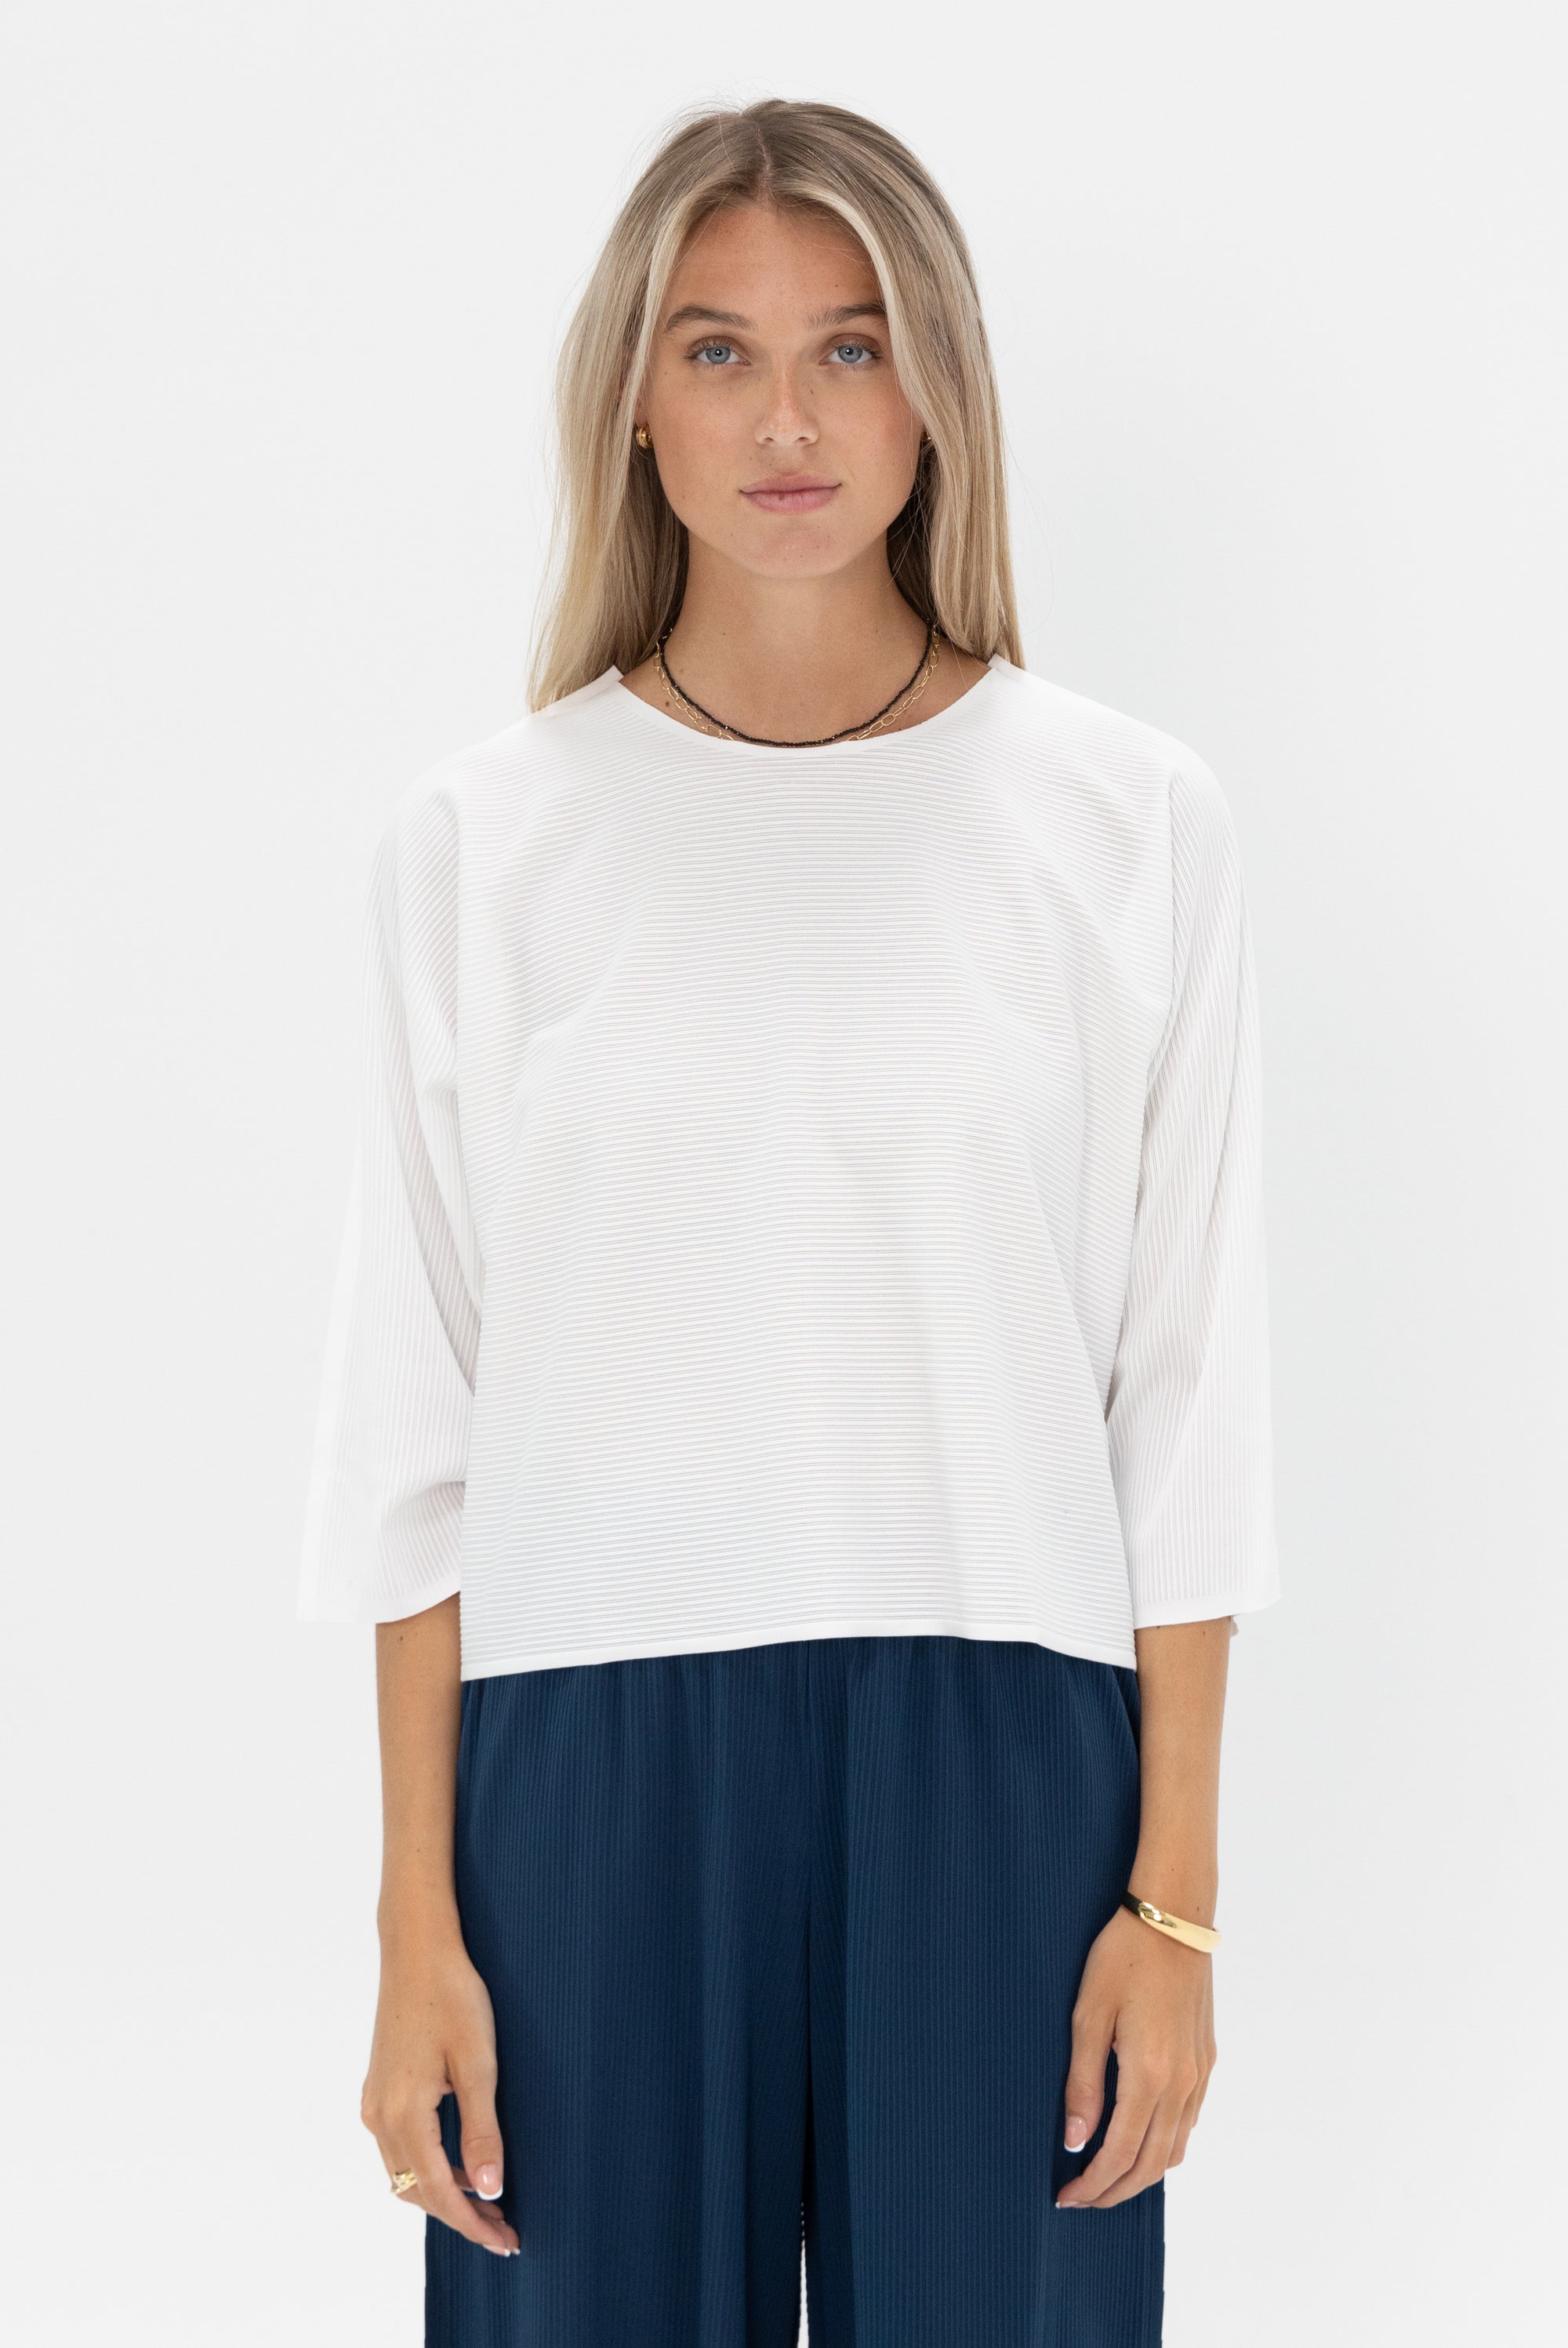 Pleats Please by Issey Miyake - A-Poc Form Tee, White